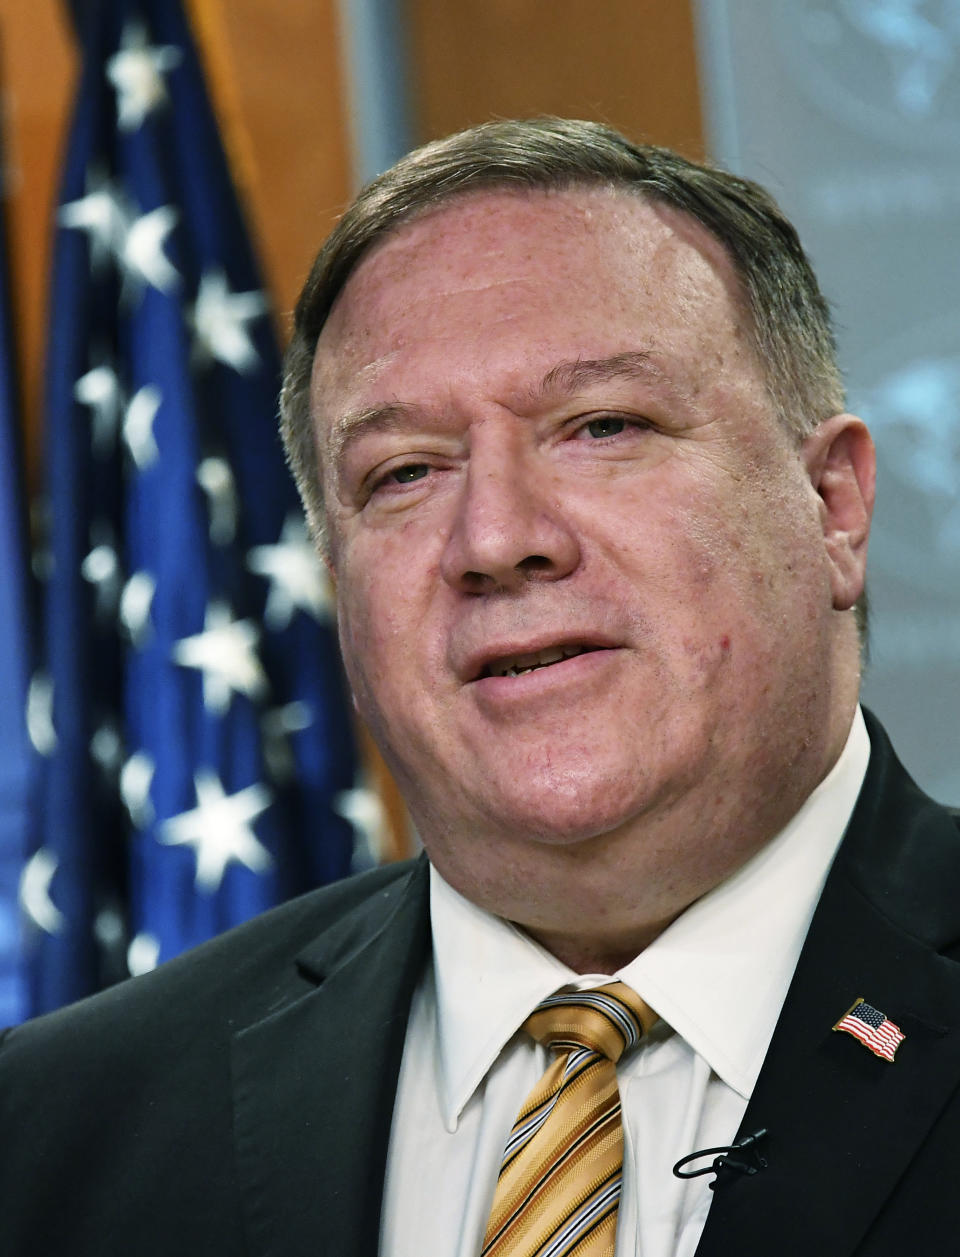 Secretary of State Mike Pompeo speaks during a press conference at the State Department, Wednesday, June 24, 2020 in Washington. (Mandel Ngan/Pool via AP)